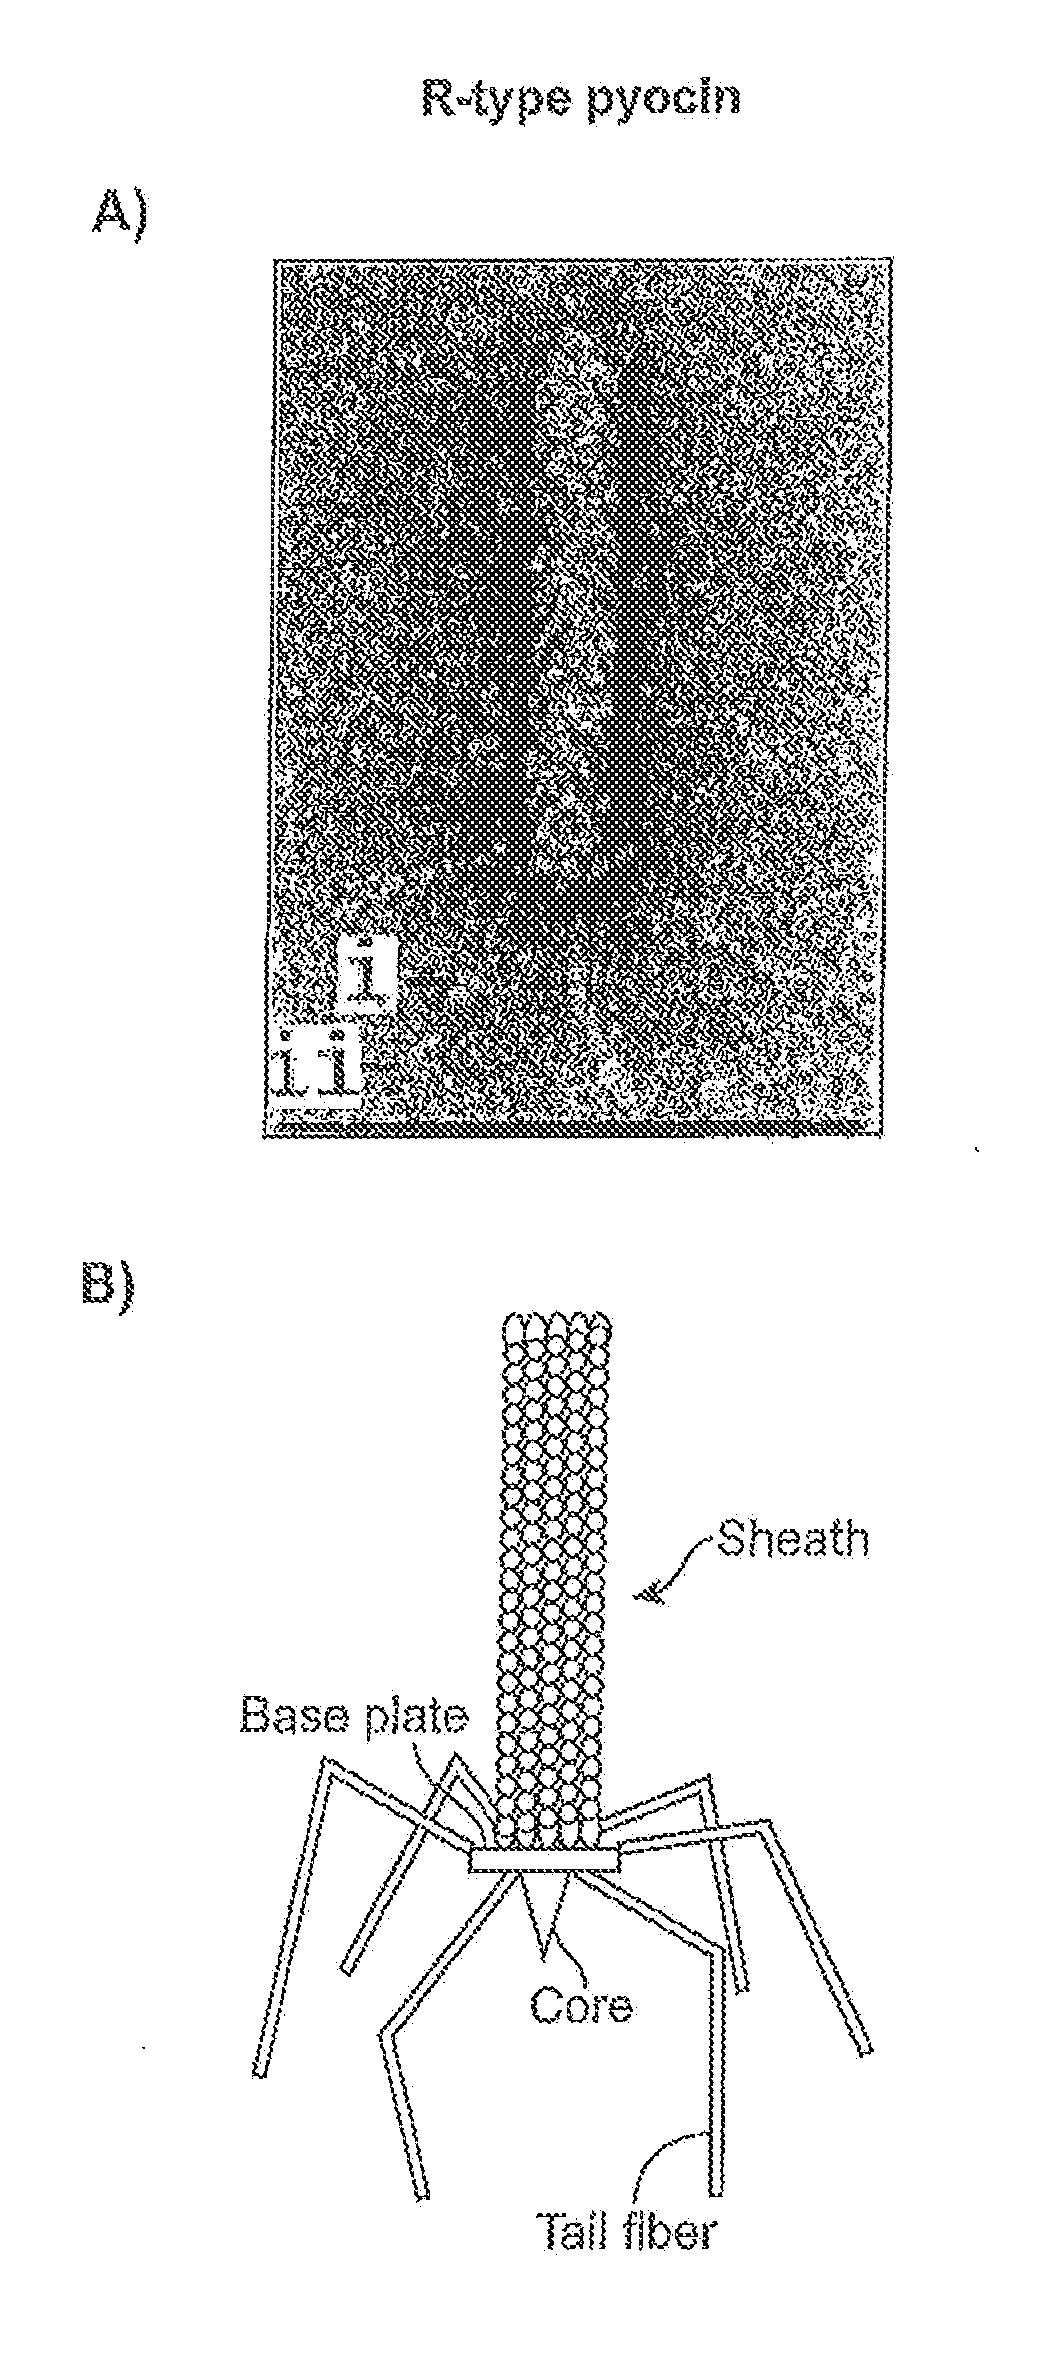 Recombinant bacteriophage and methods for their use